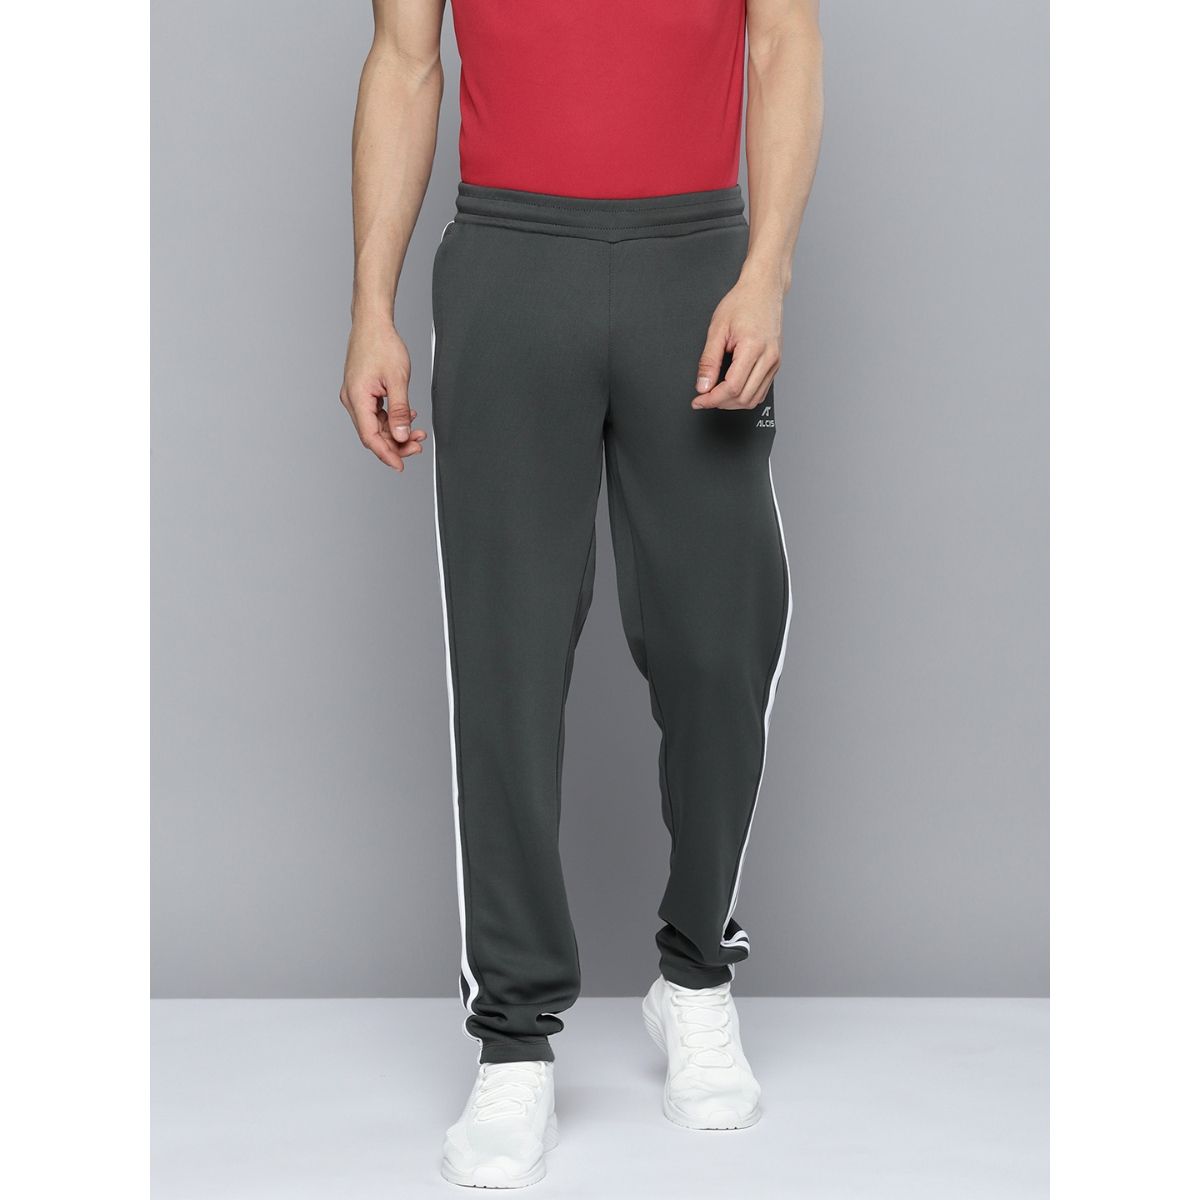 Buy Men High Performance Track Pants Online in India  aguantein  Aguante